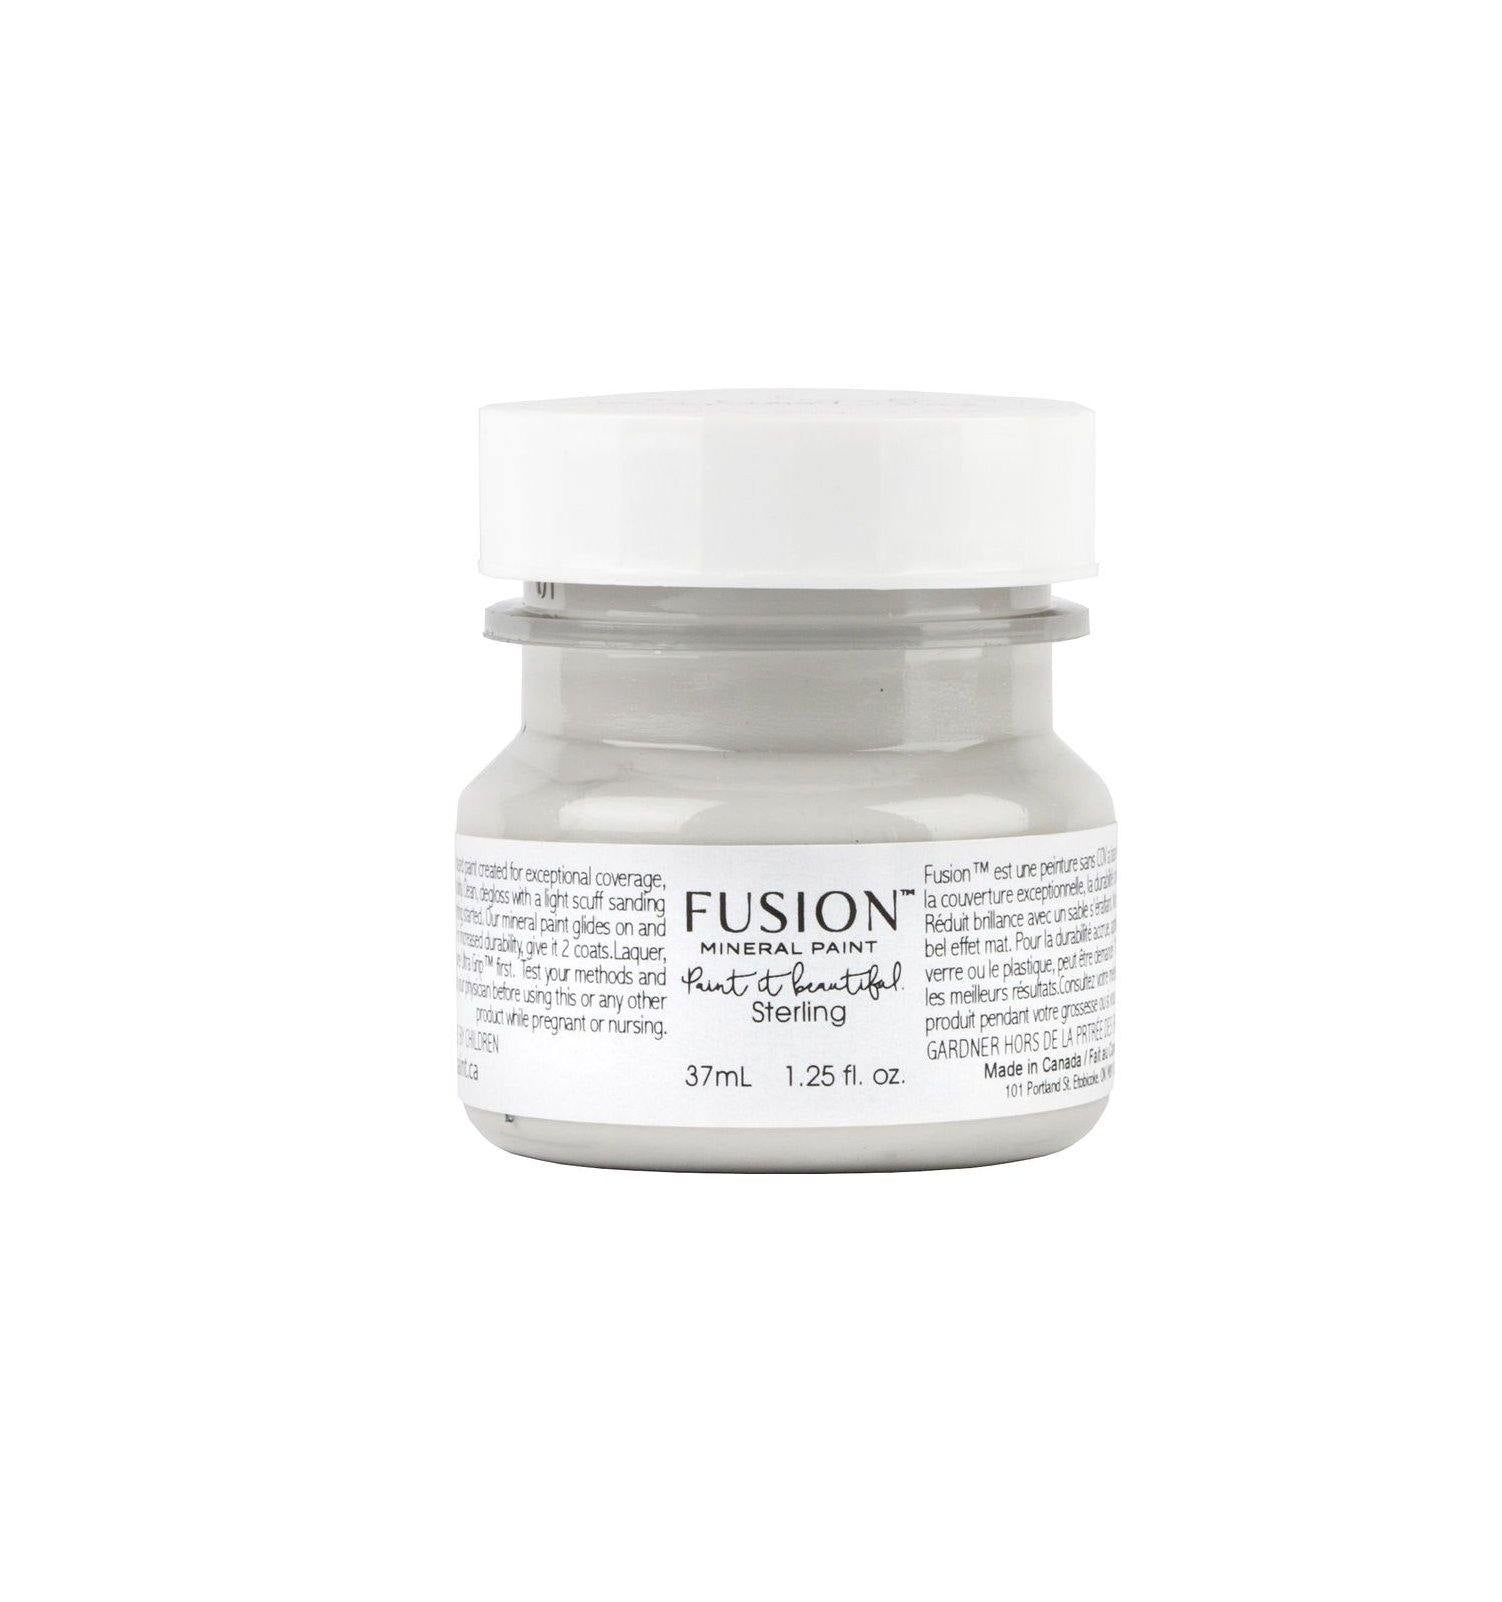 Fusion Mineral Paint Sterling Tester